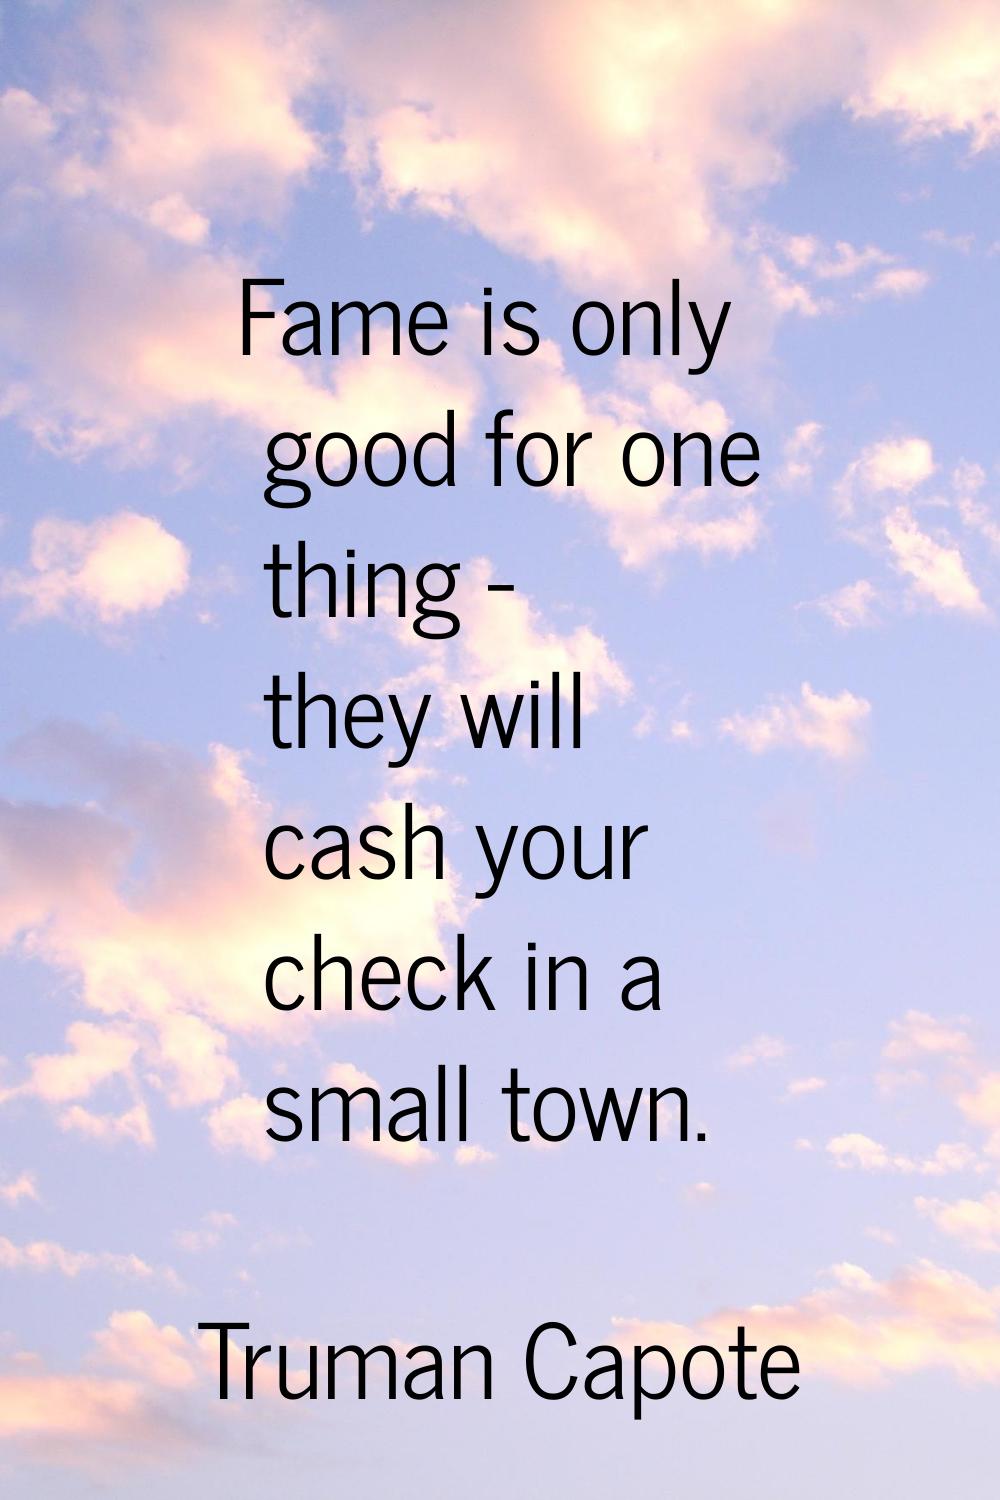 Fame is only good for one thing - they will cash your check in a small town.